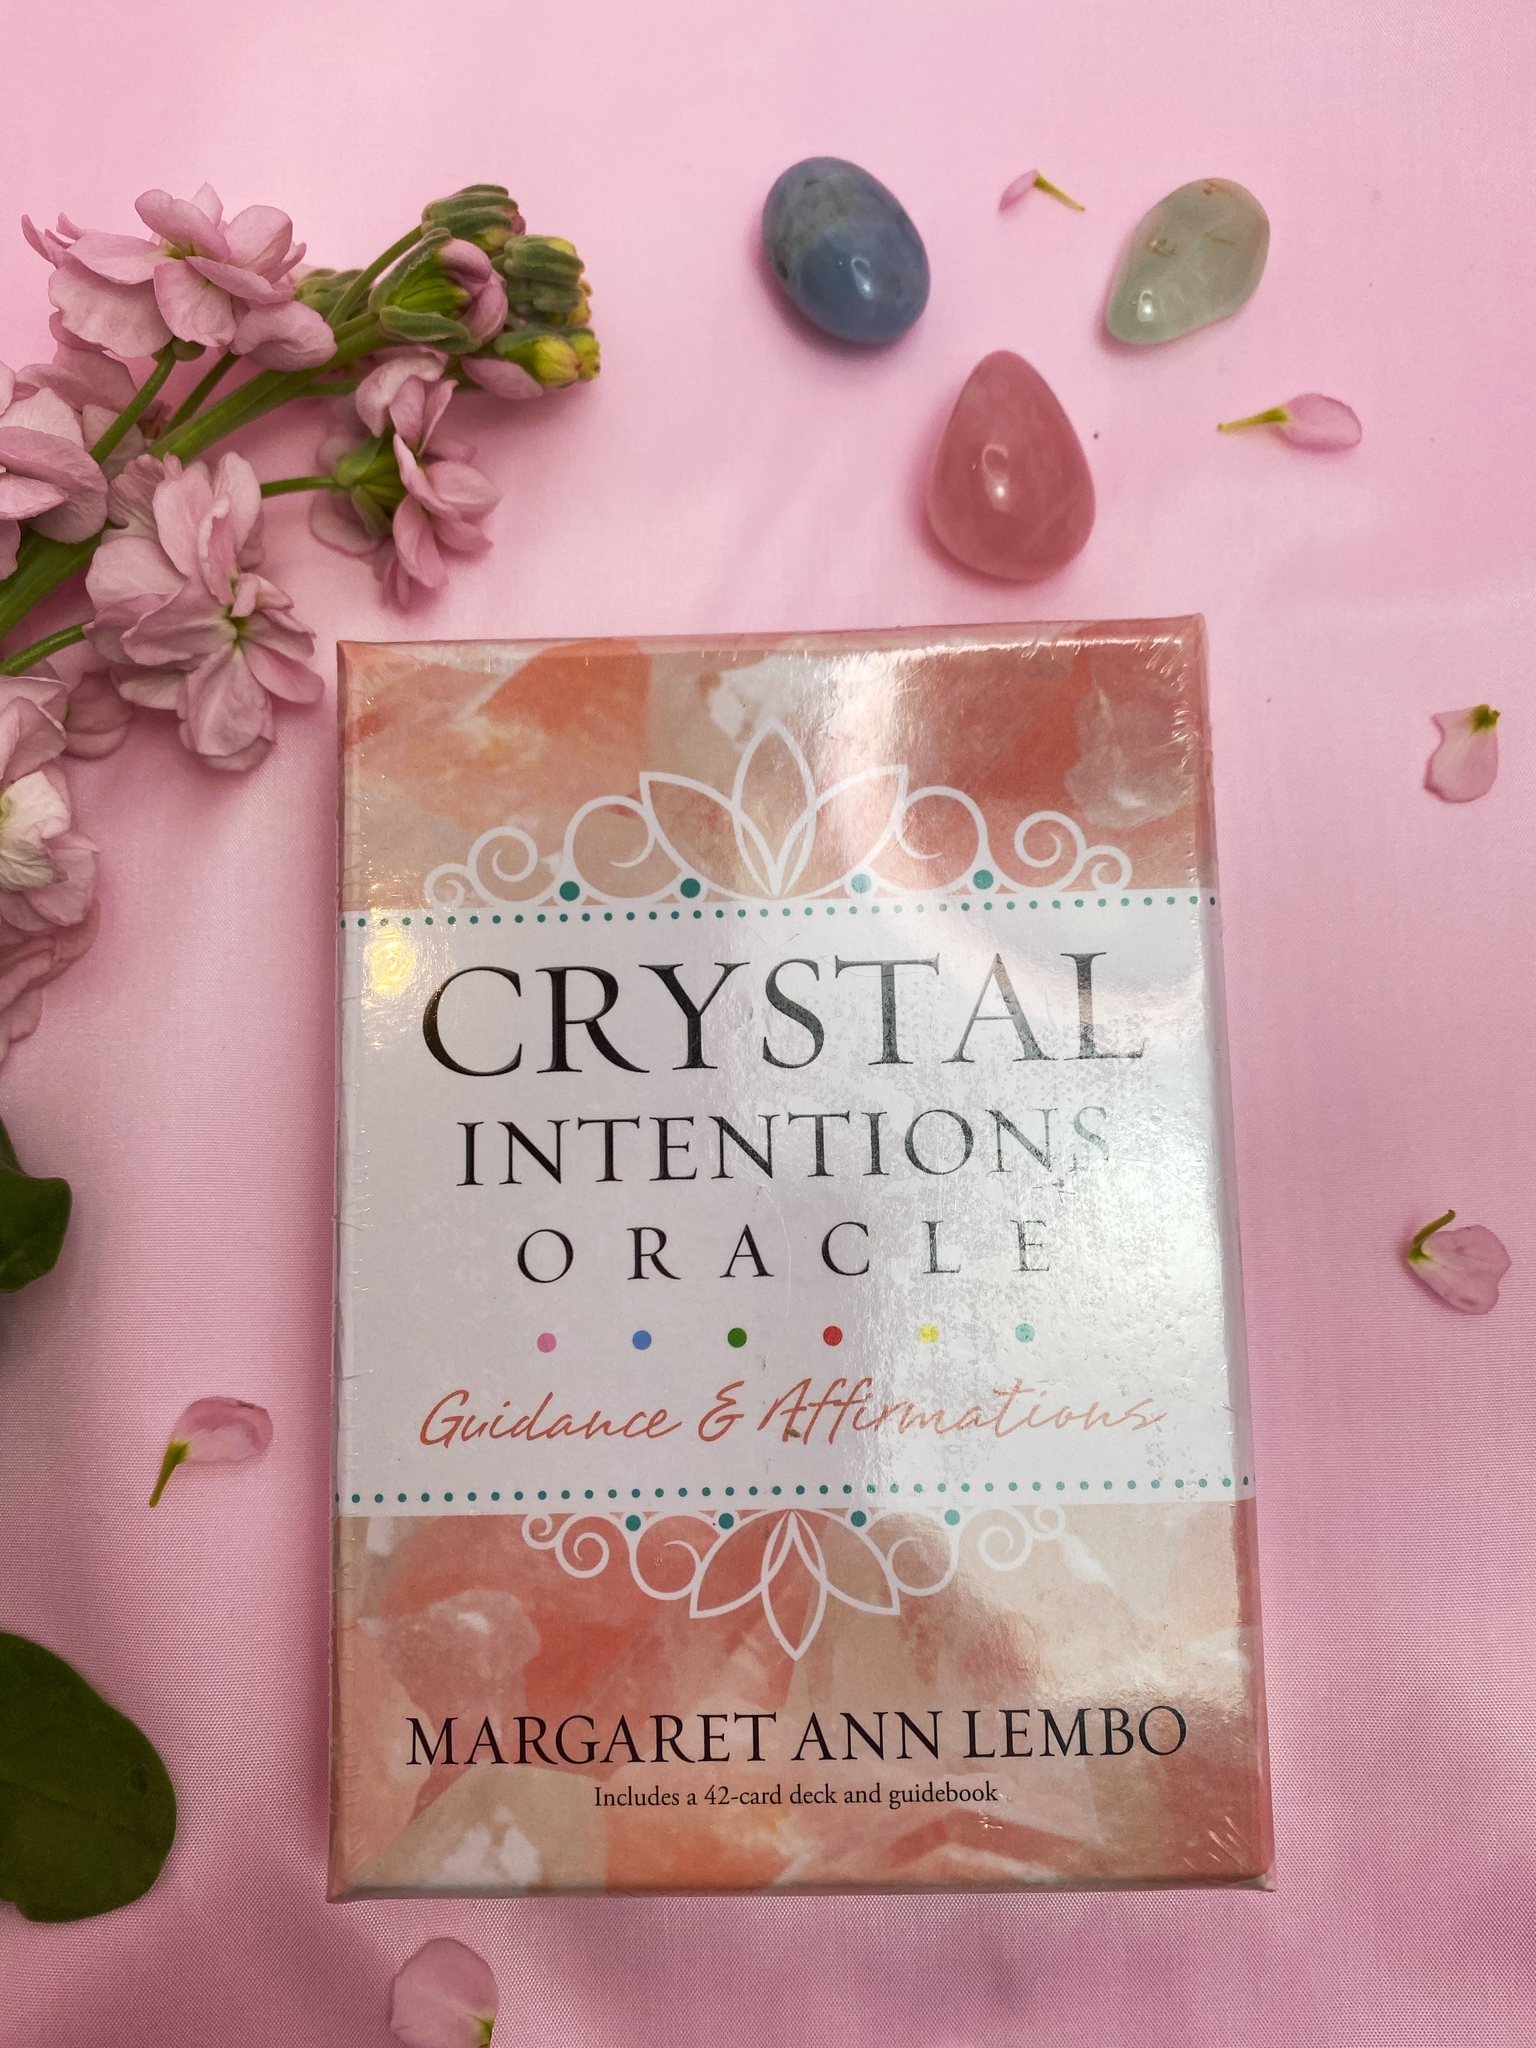 Crystal intentions oracle